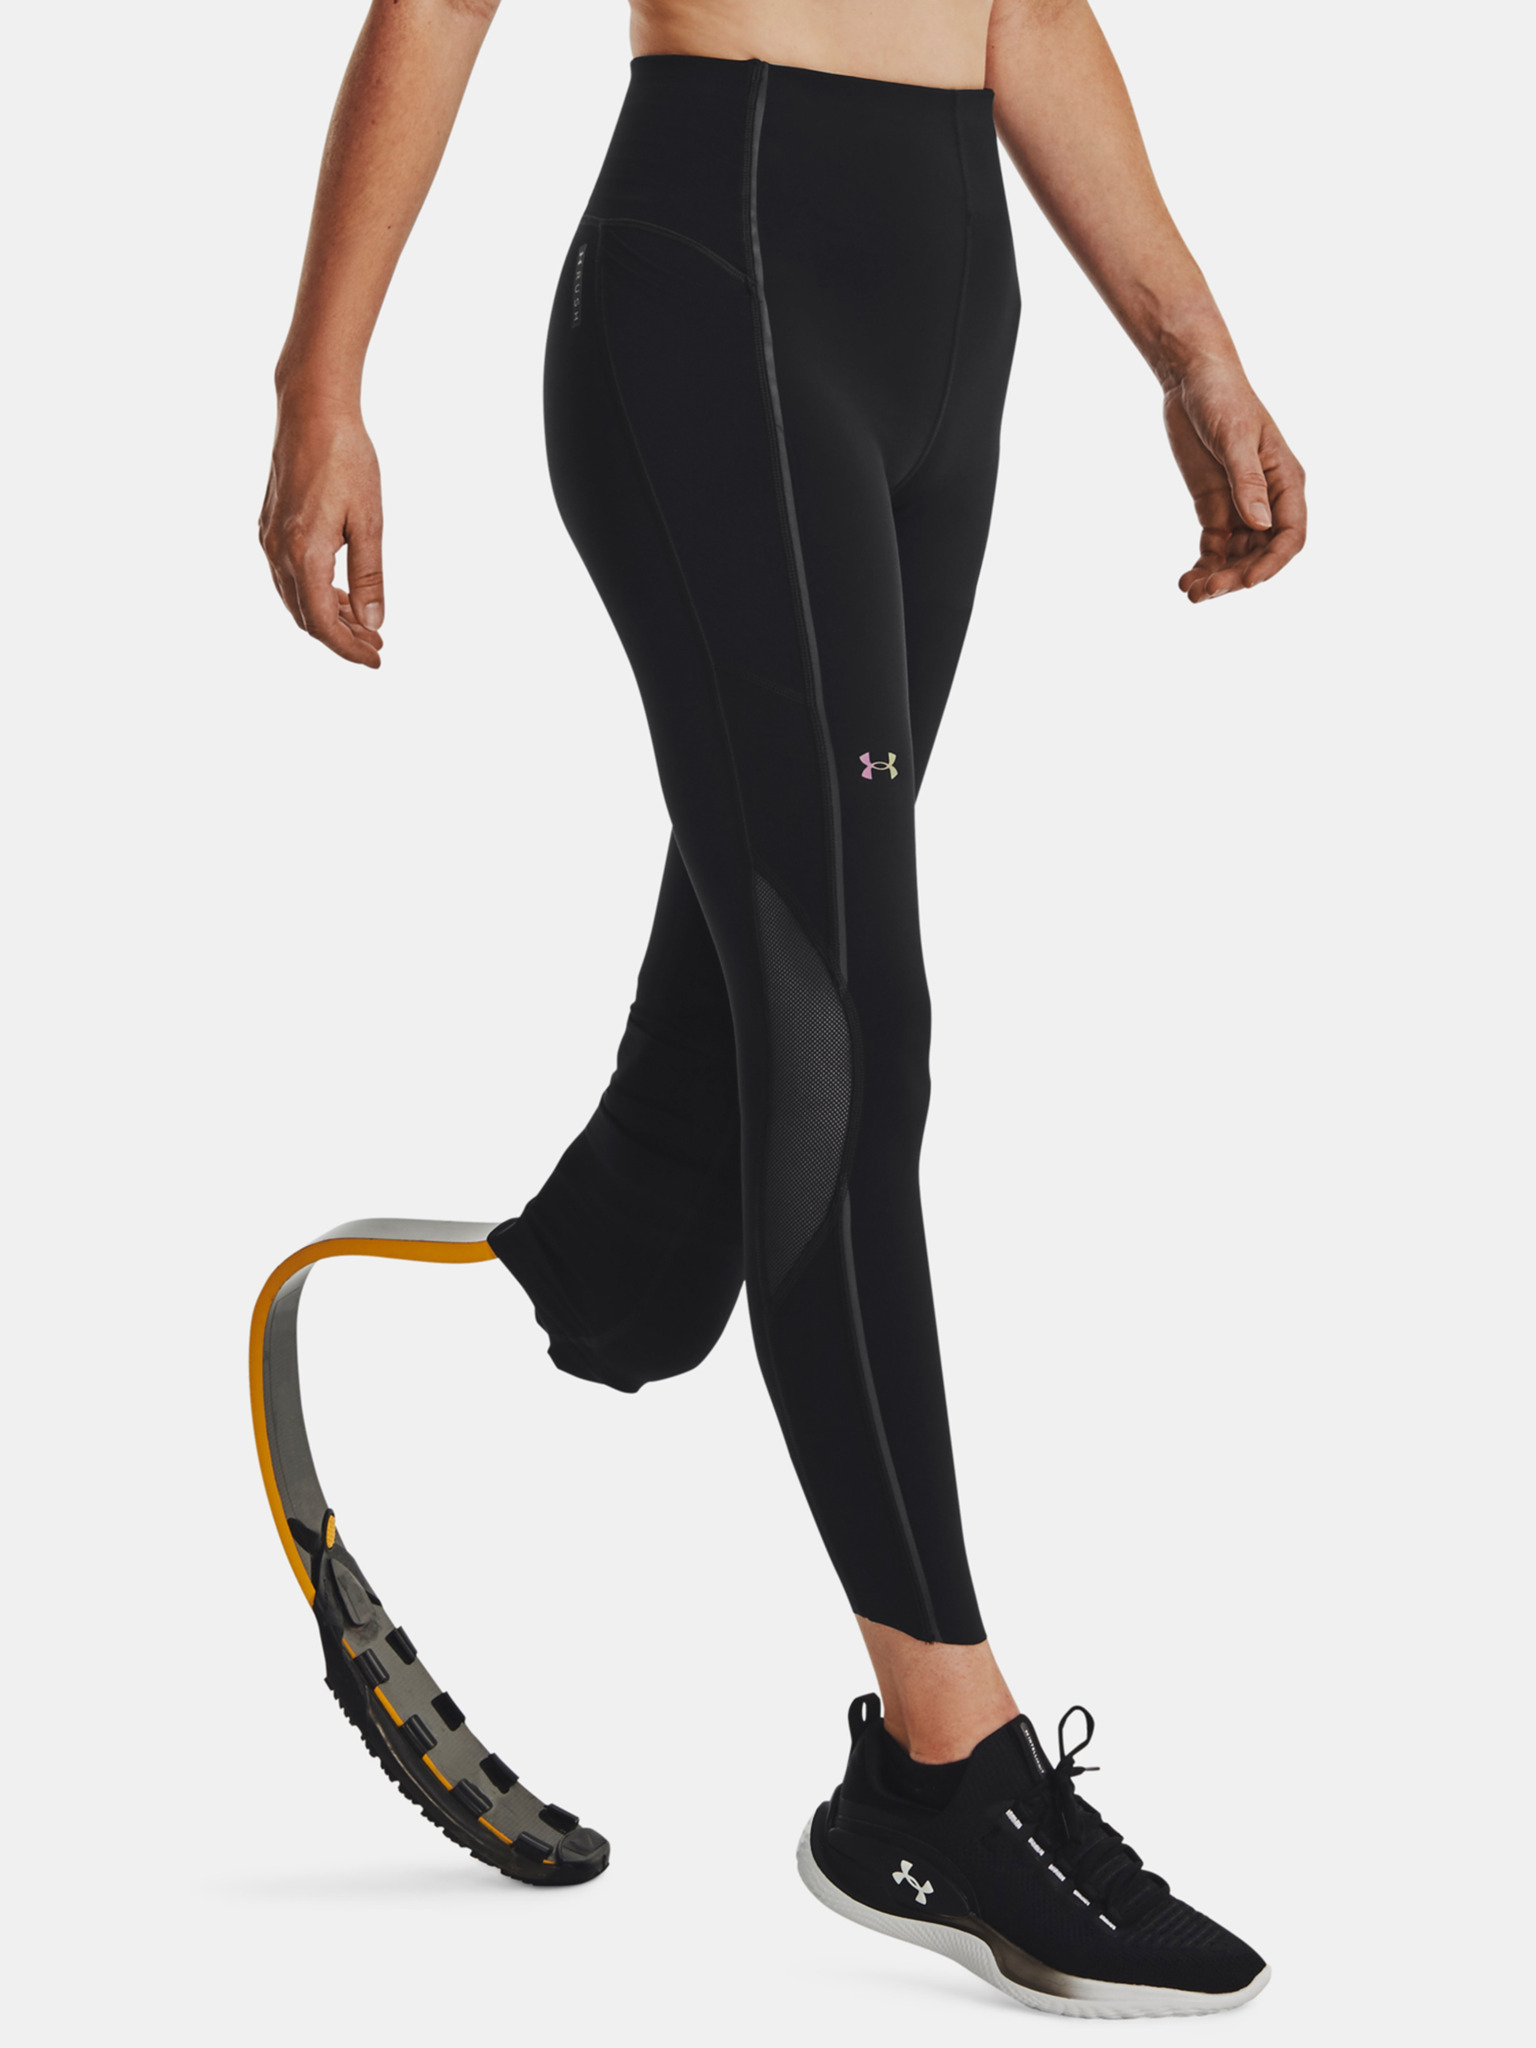 Under Armour Cropped Leggings in Black - Size Small**